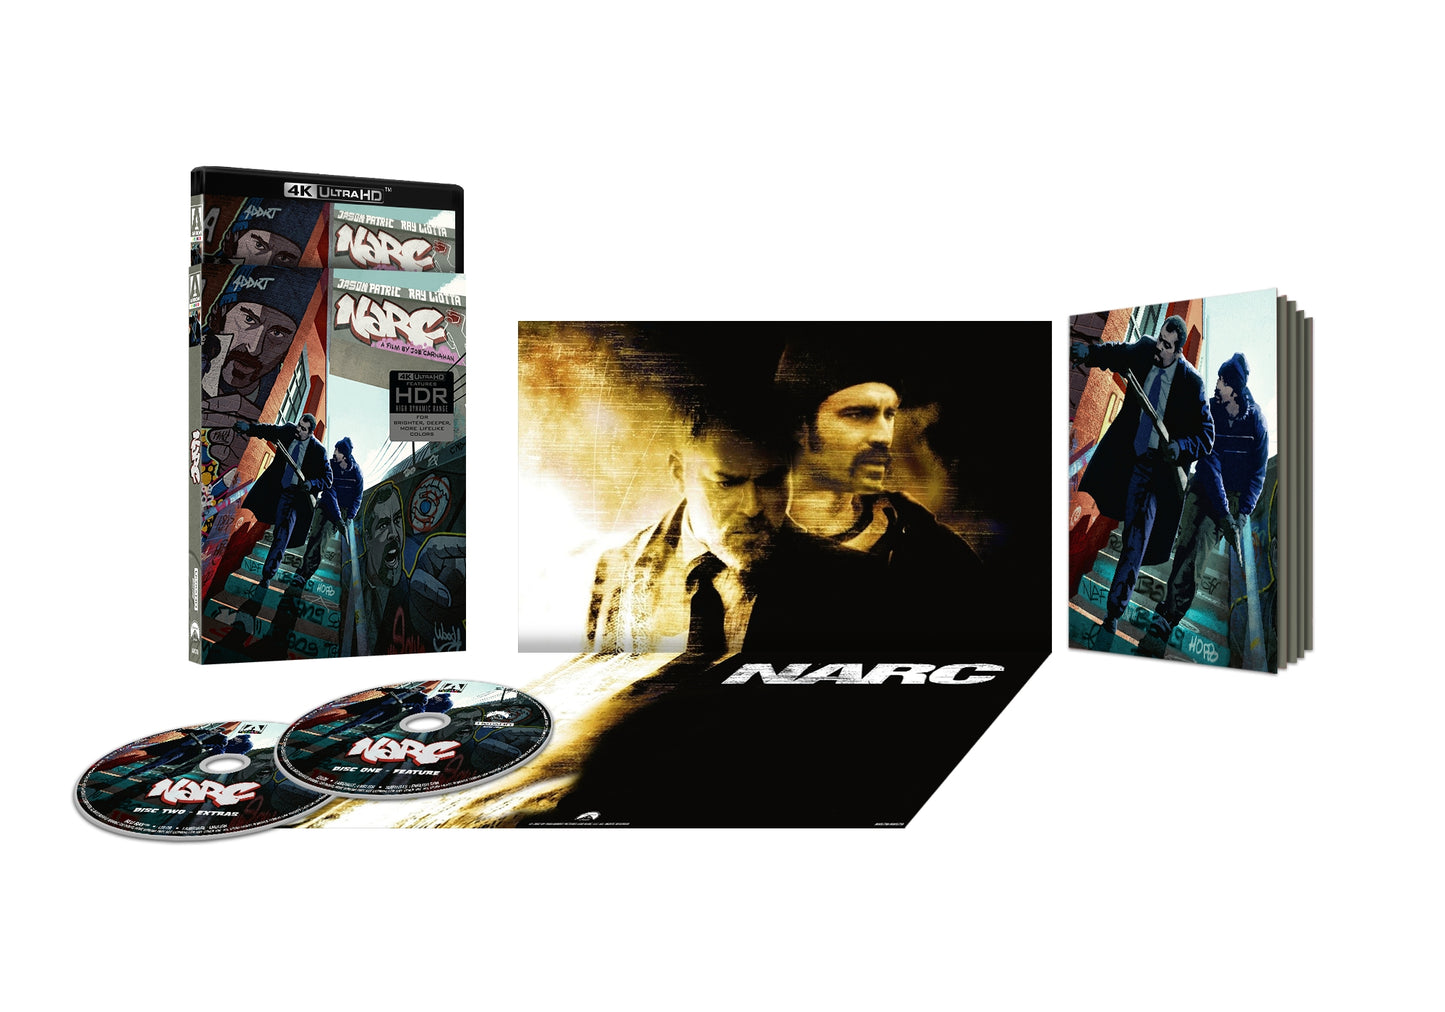 Narc 4K UHD Limited Edition with Slipcover (Arrow U.S.)